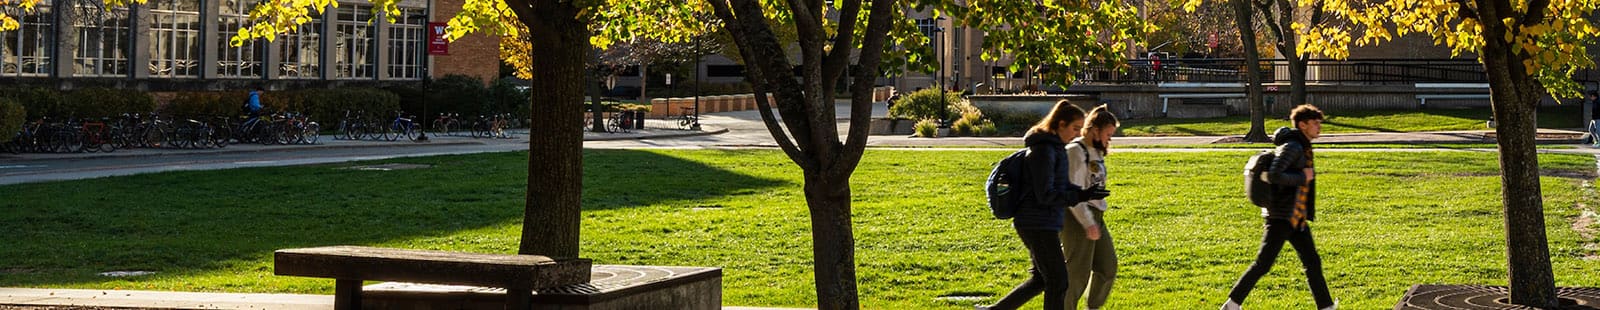 Three students cross campus in the shadow of green trees and with a bright green lawn in view.